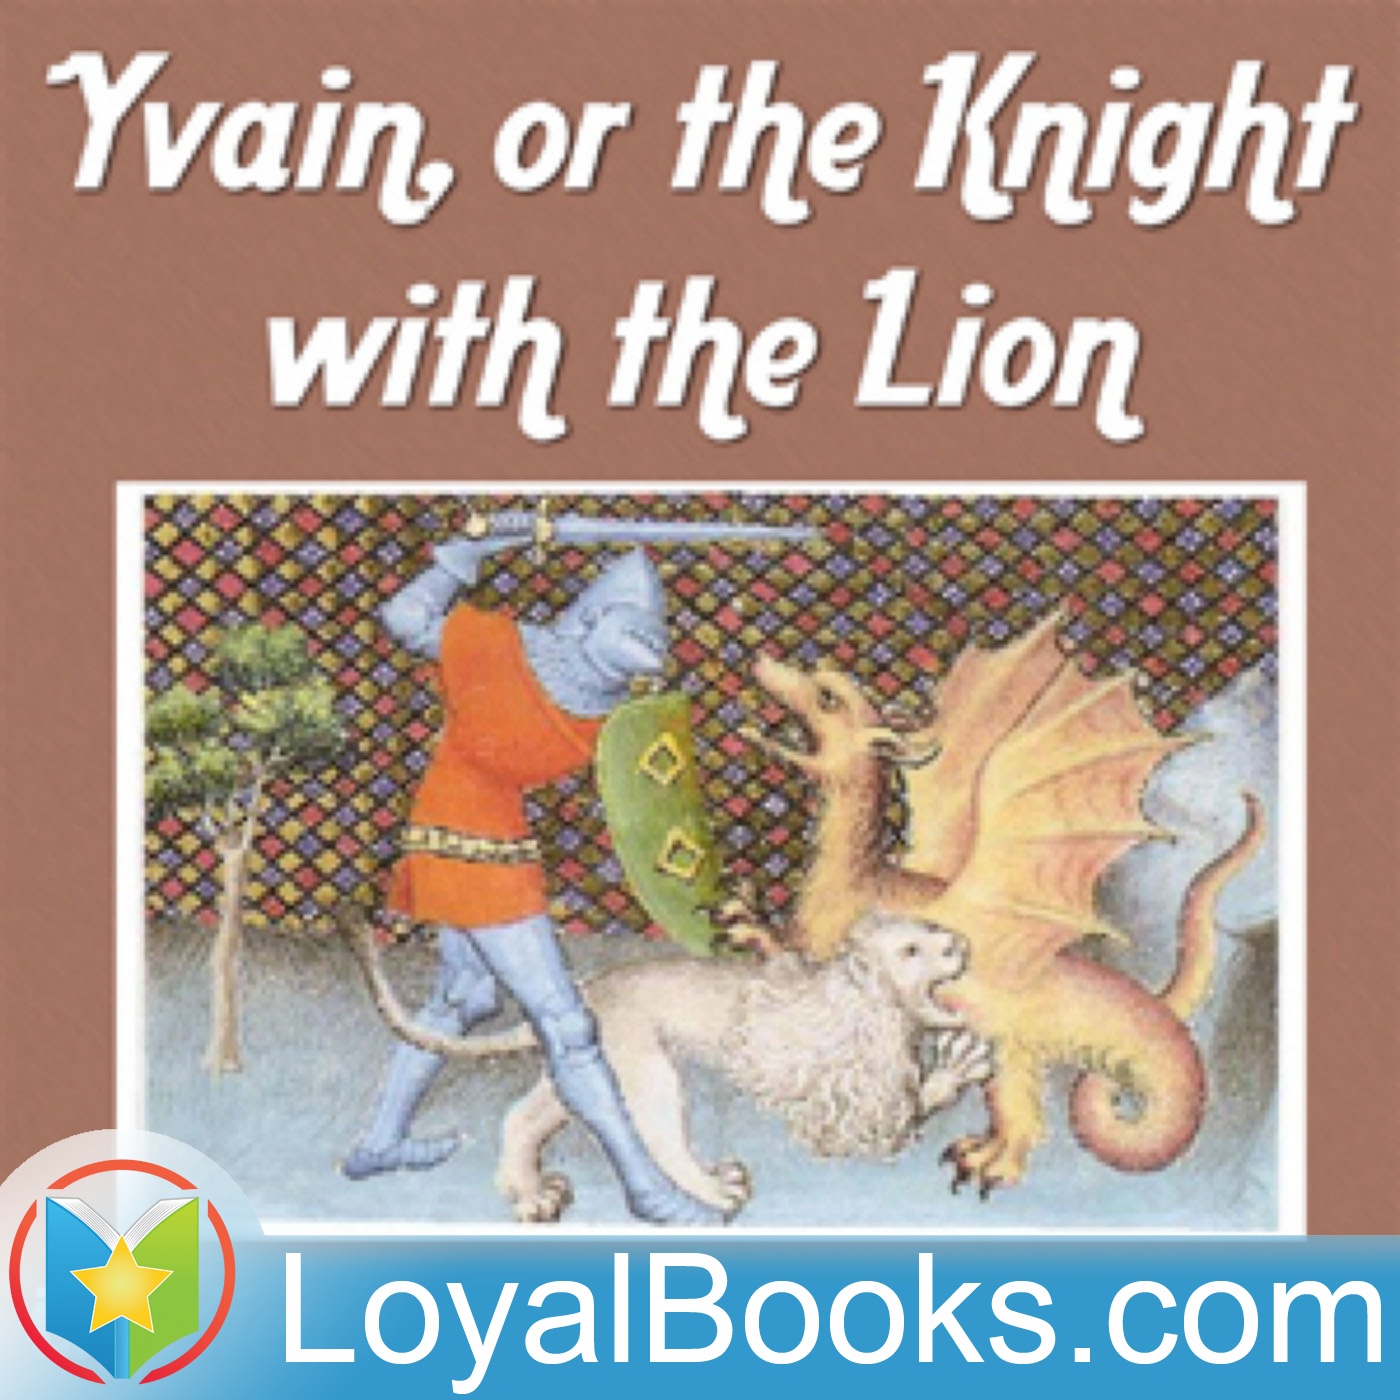 Yvain, or the Knight with the Lion by Chretien de Troyes